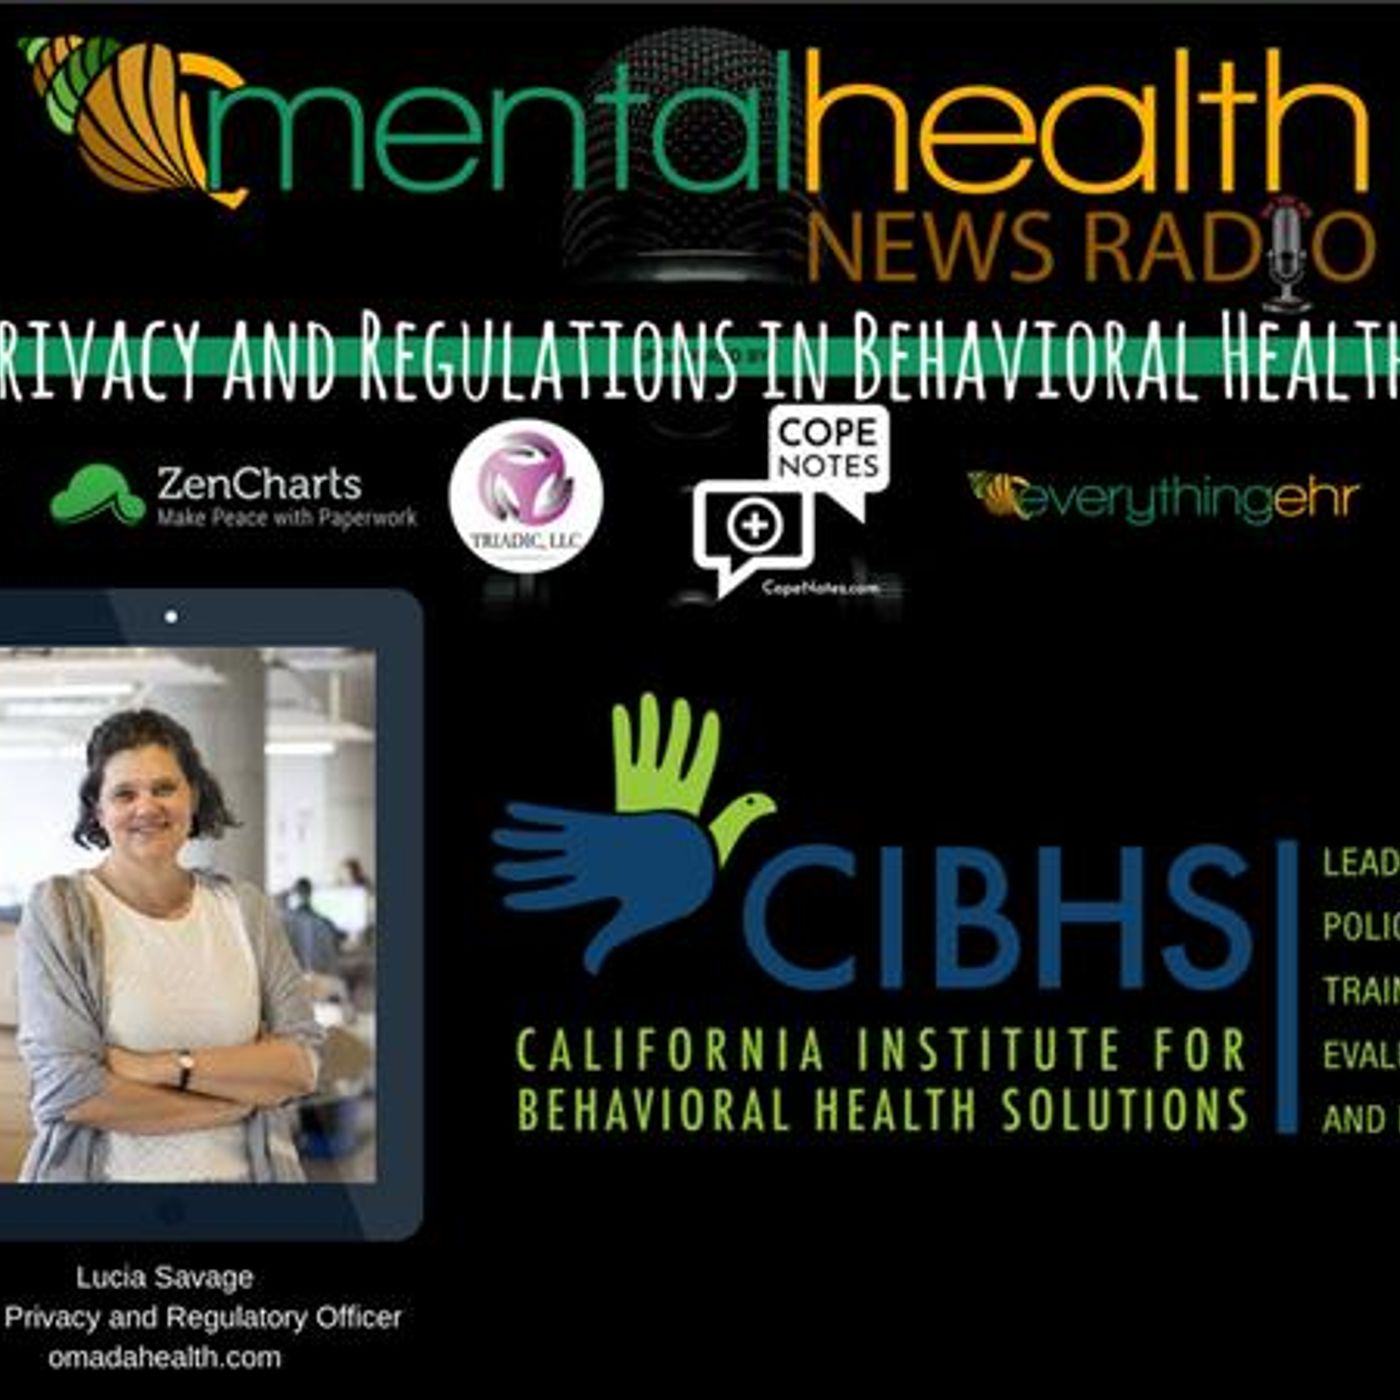 Mental Health News Radio - Privacy and Regulations in Behavioral Health with Lucia Savage